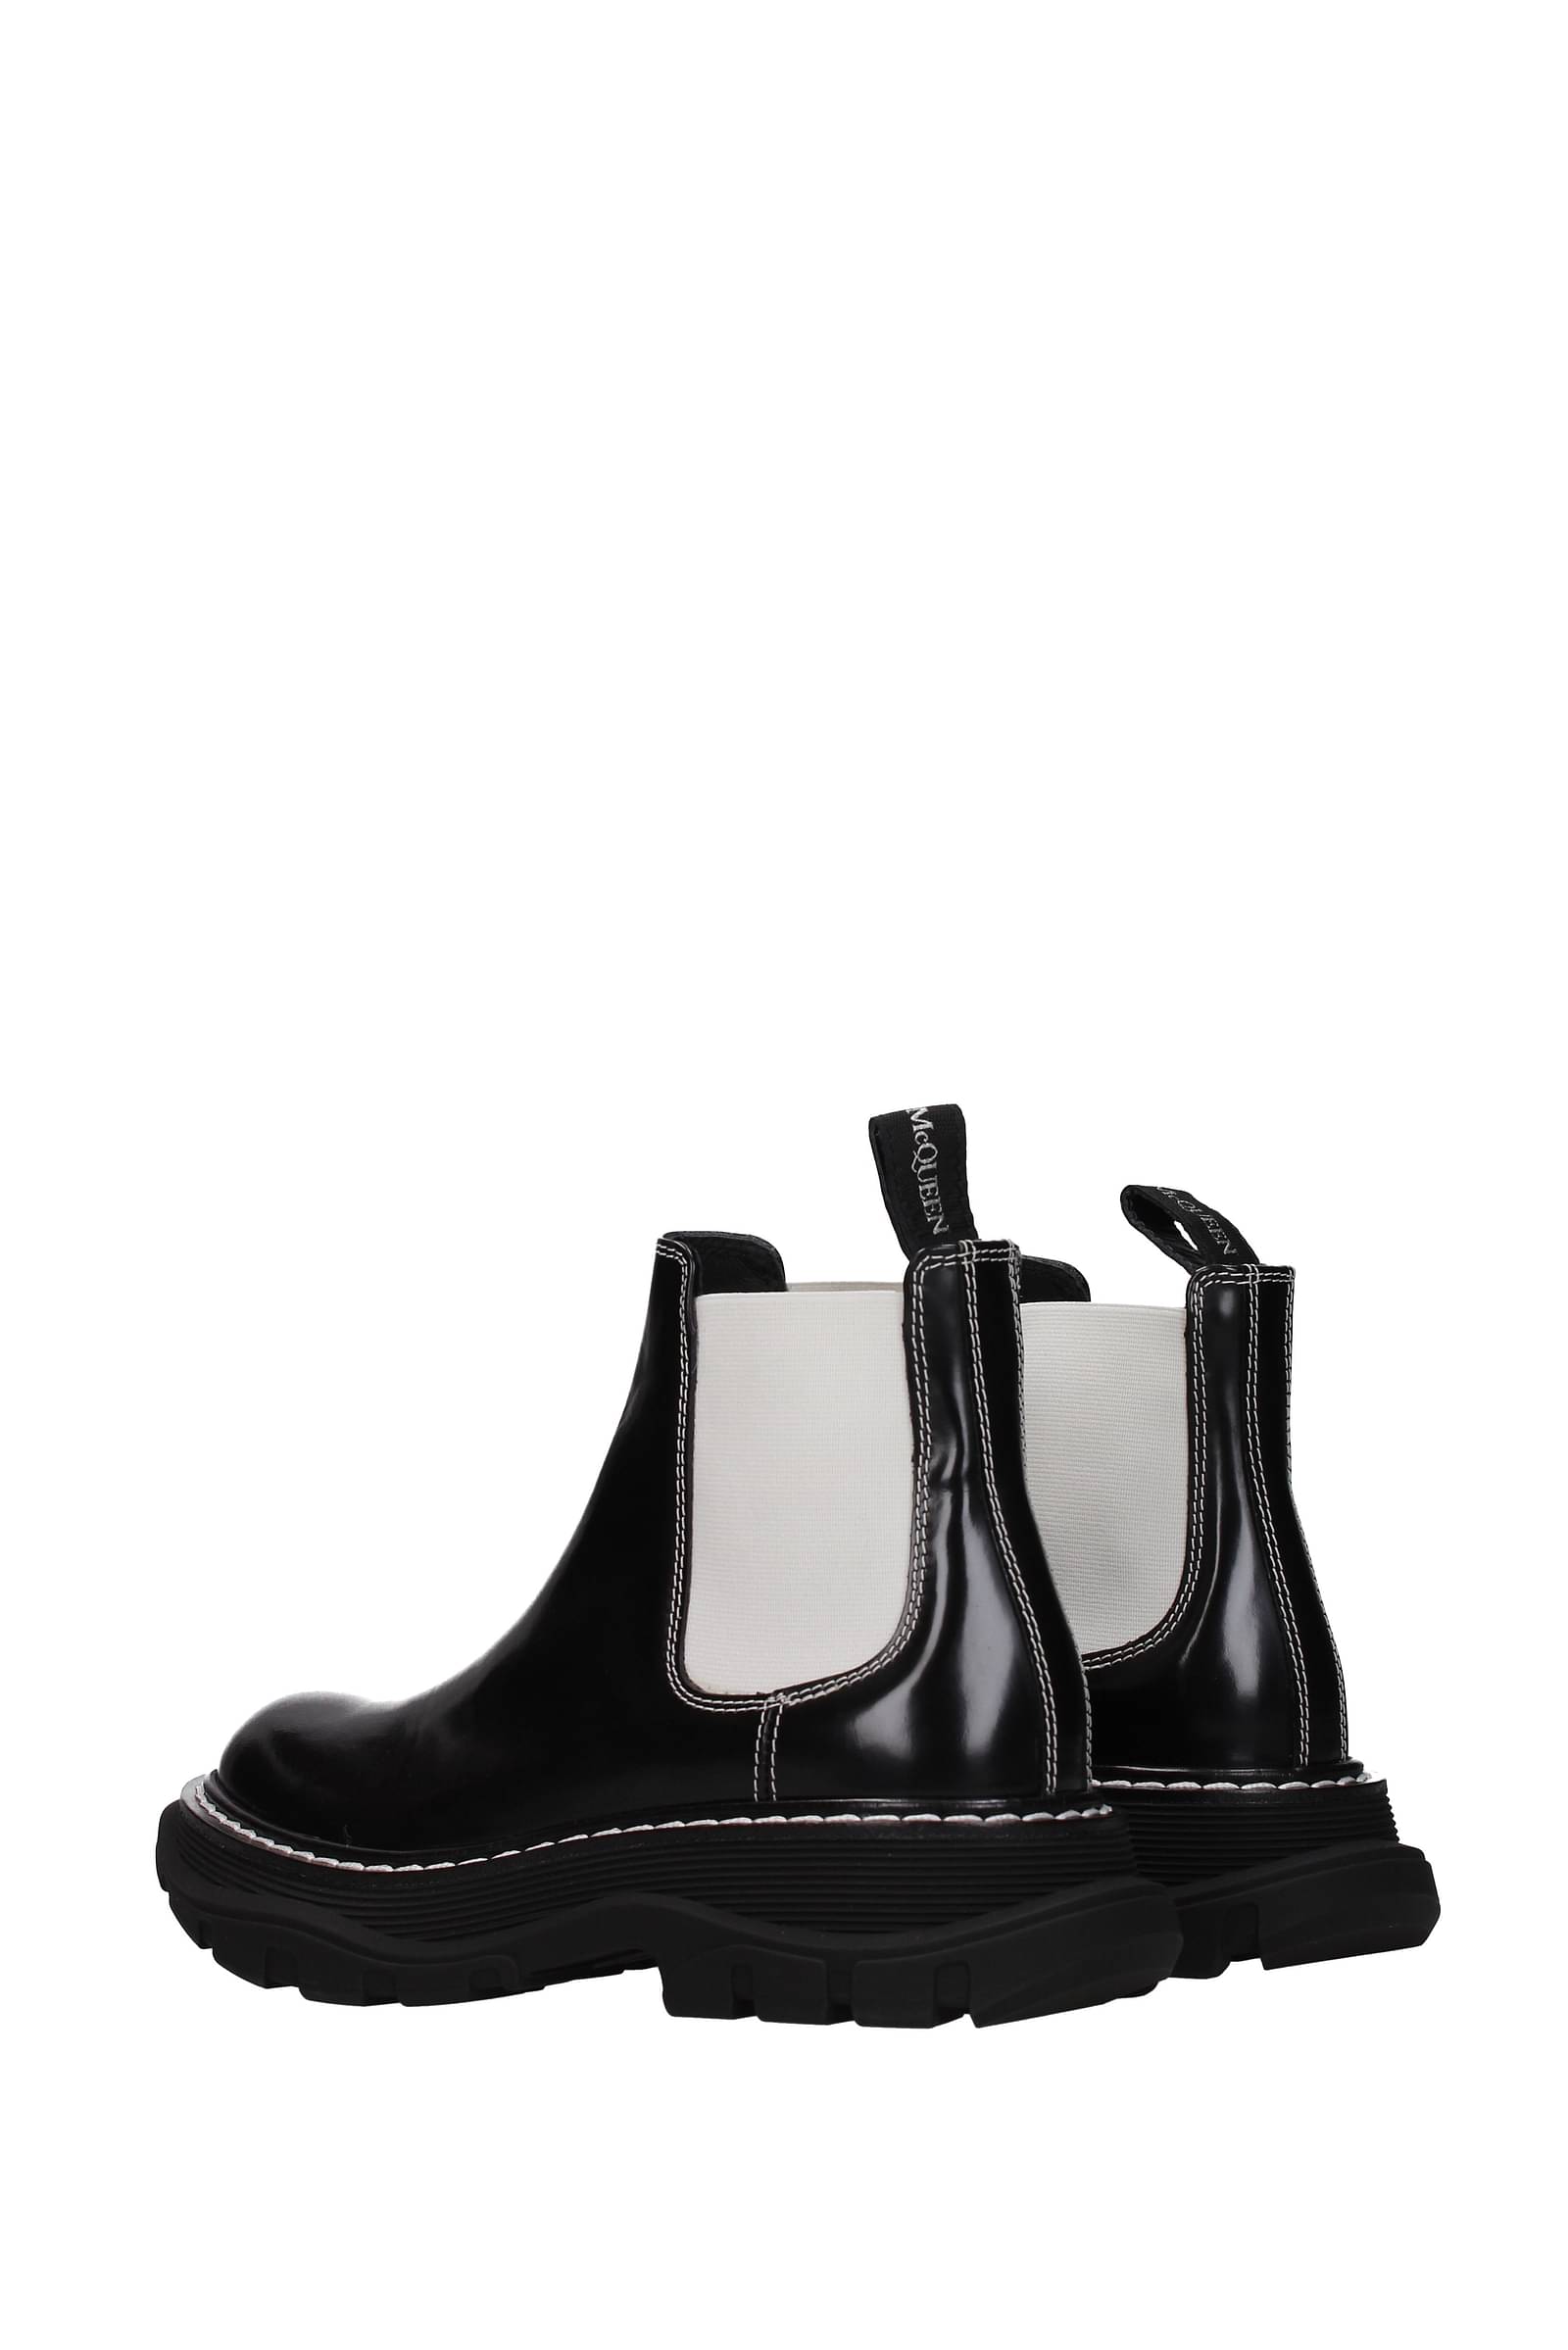 Ankle Boots Leather Black White - Alexander McQueen - Women